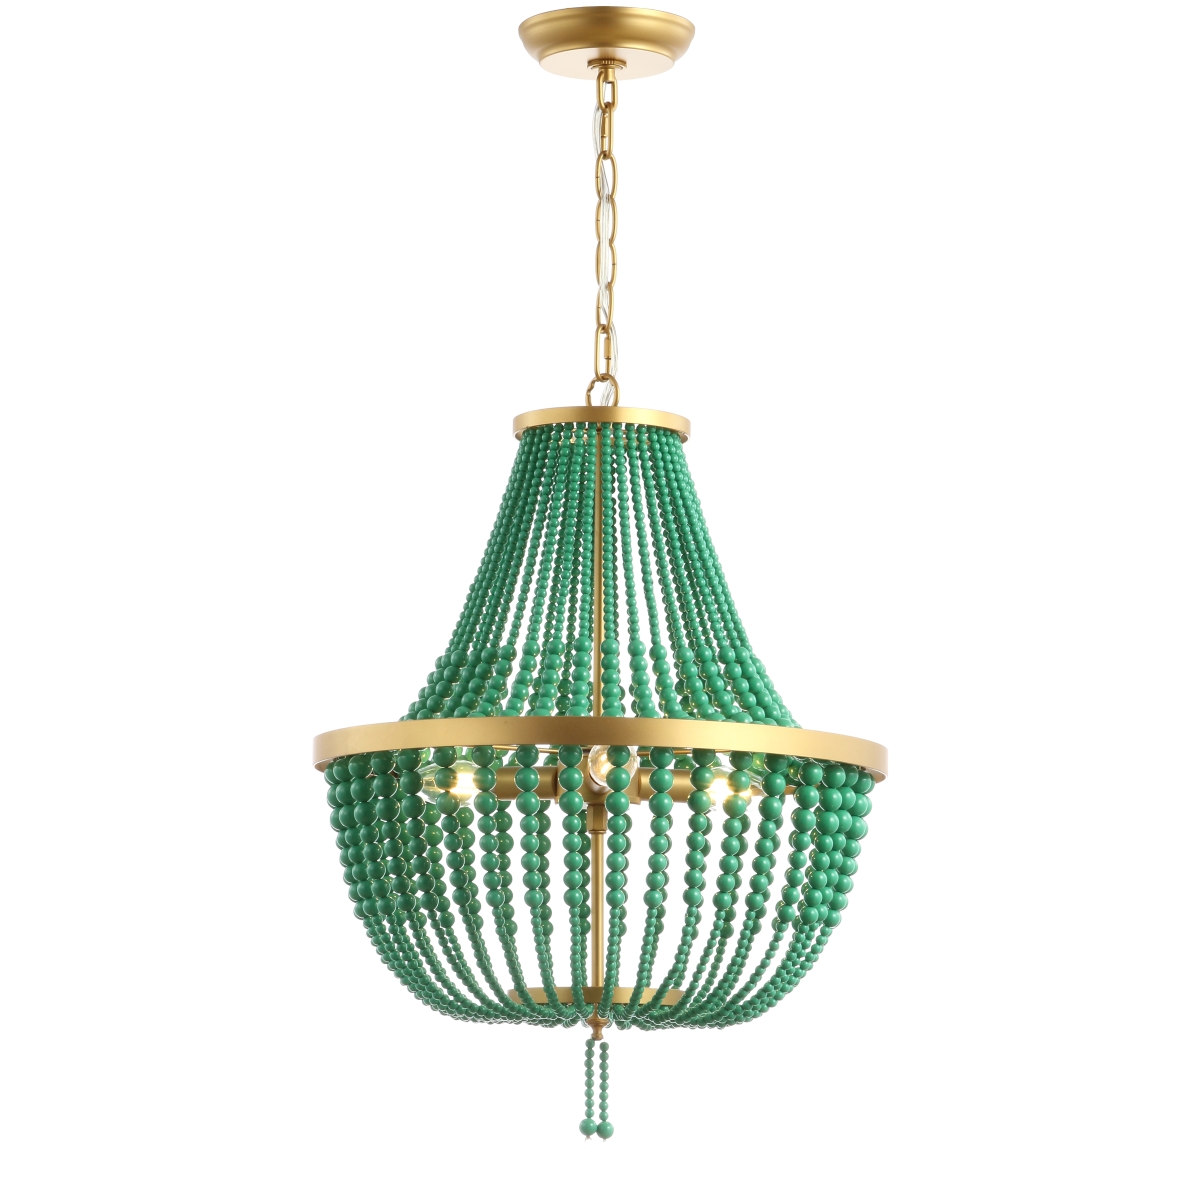 Dsn1300a It All Started With A Lamp Chandelier - Green & Gold